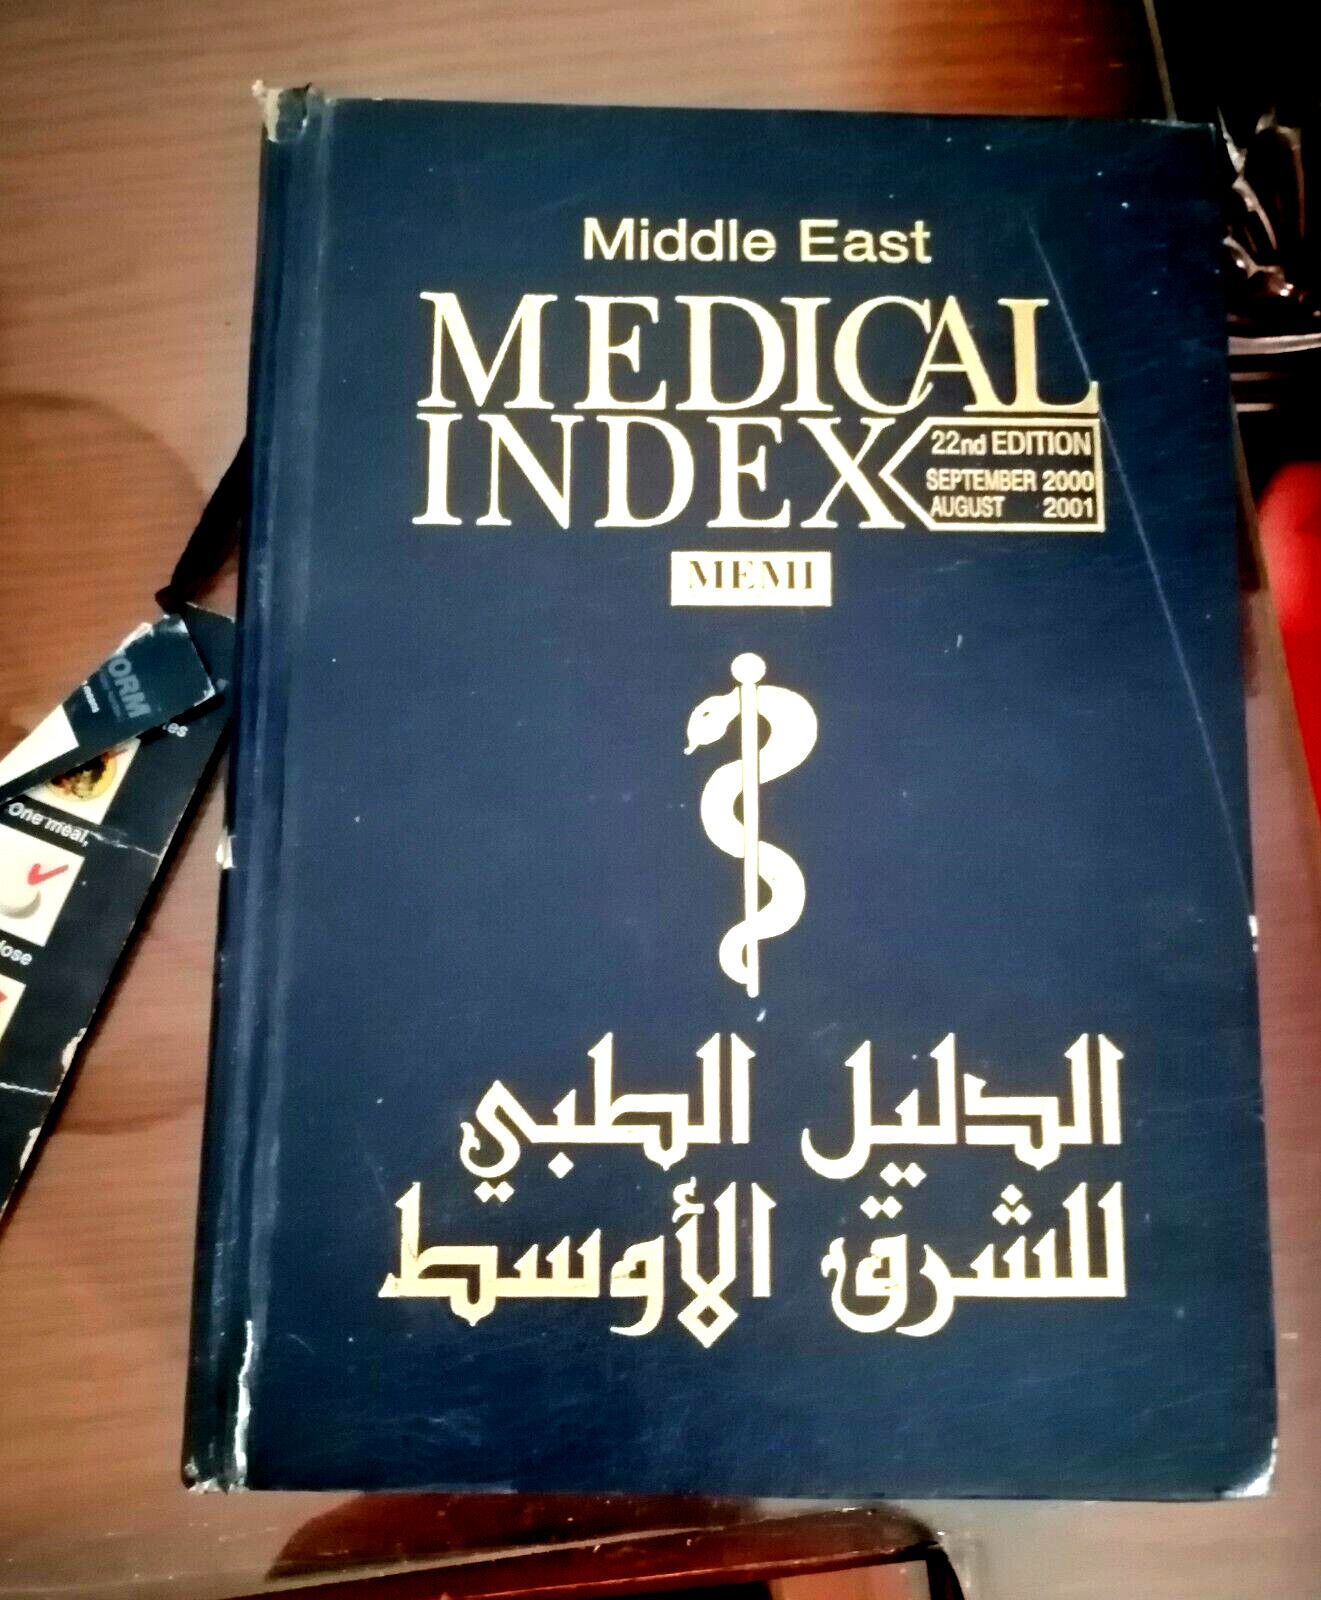 Vintage Pharmaceutical Huge Book Middle East Midecal Index